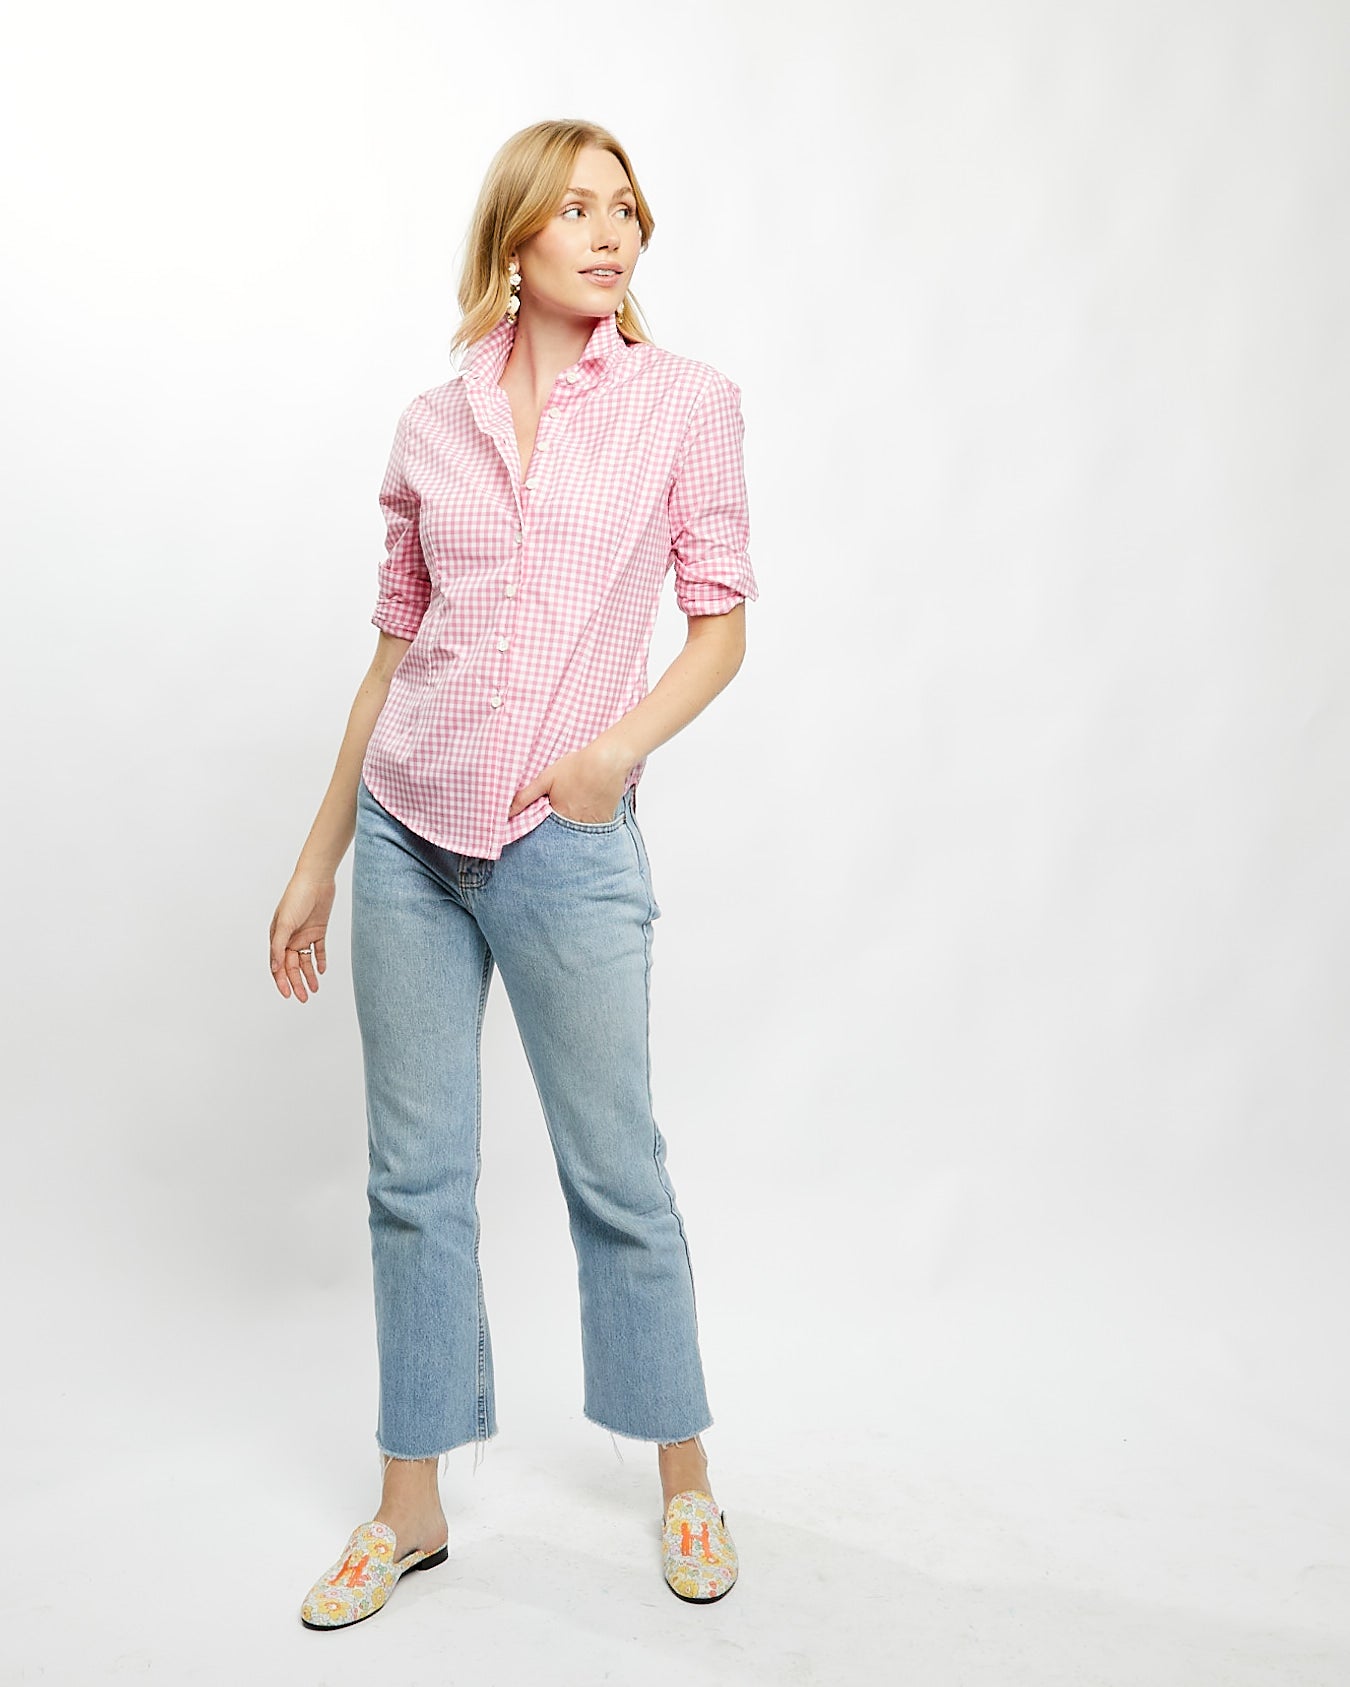 Fiona Blouse in Pink Gingham